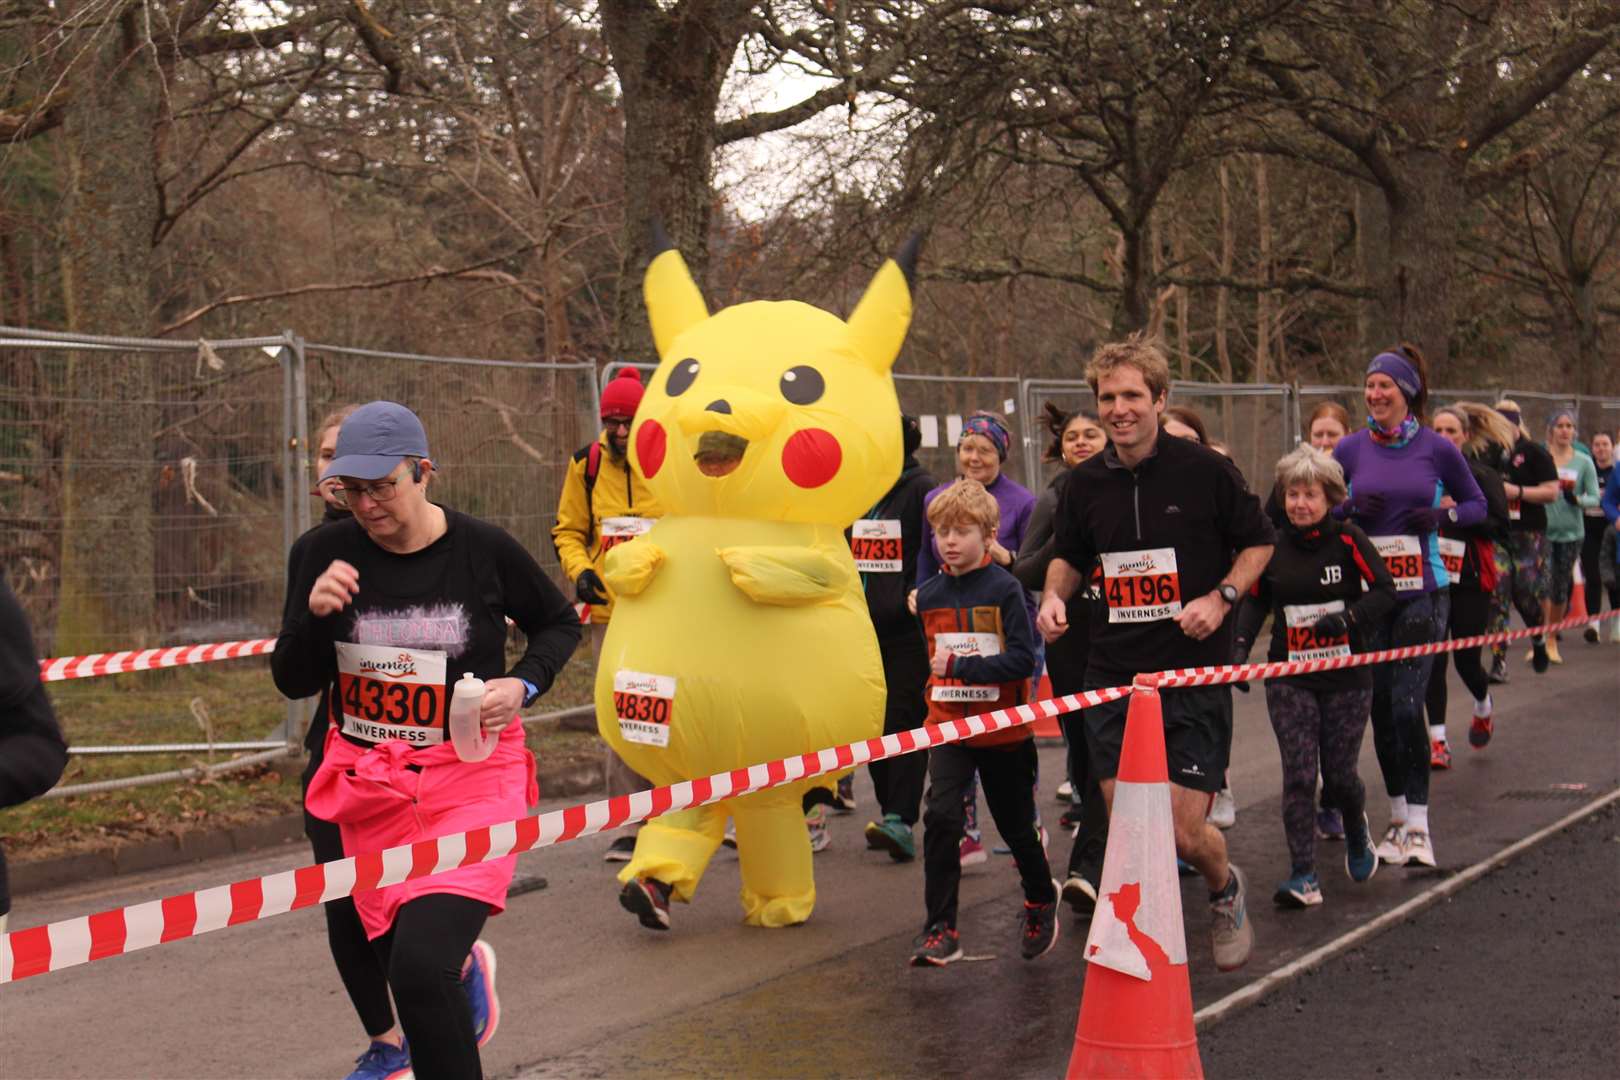 Pikachu steps out in the 5K event..